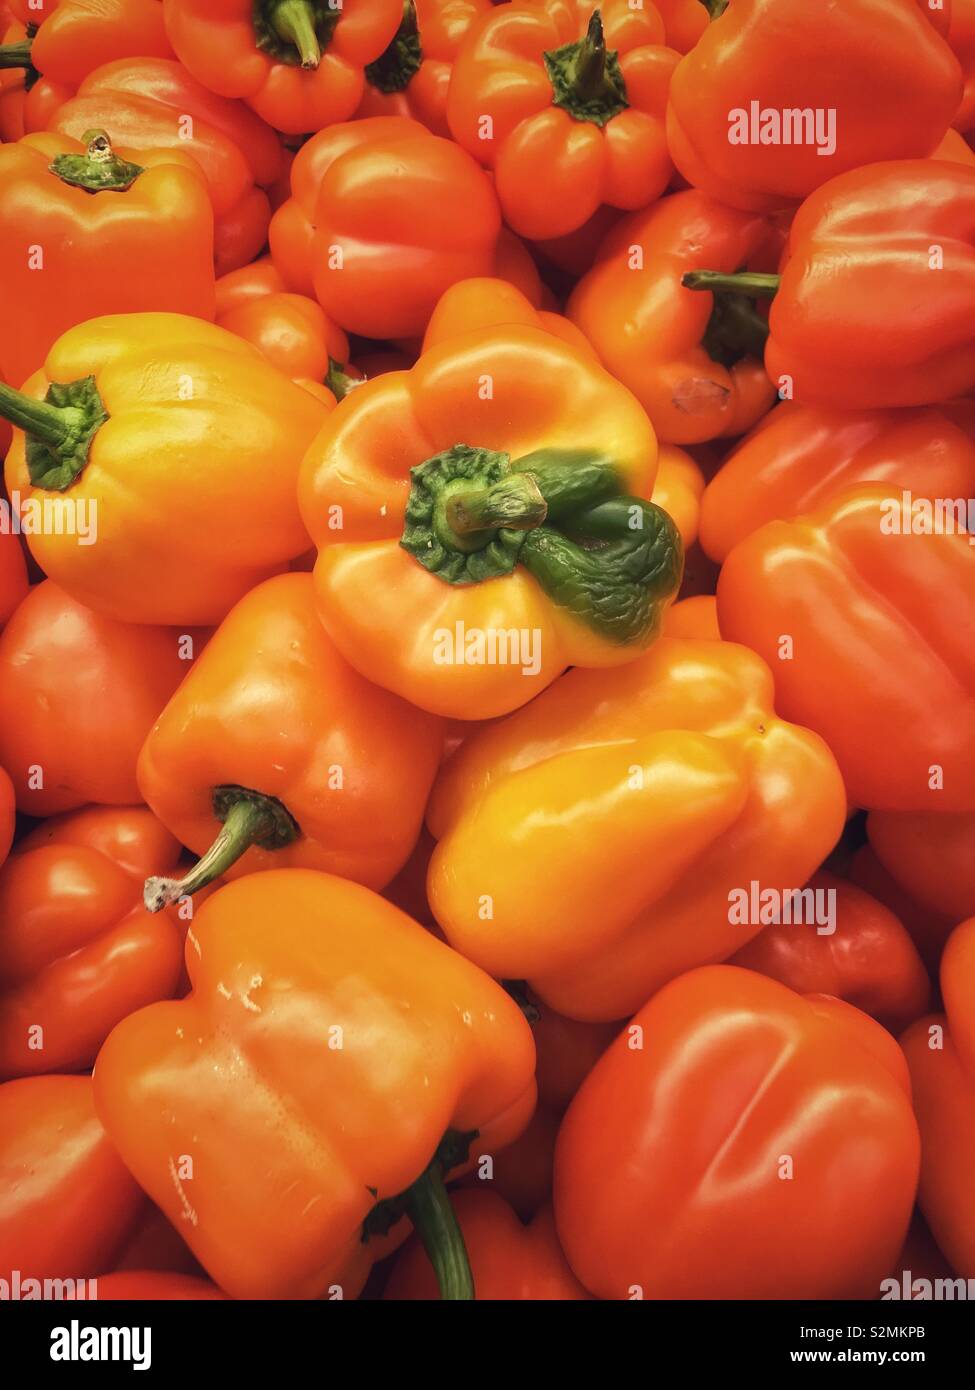 Full frame of a farm fresh imperfect orange pepper on a pile of perfect orange peppers on display and for sale at the local produce market. Stock Photo